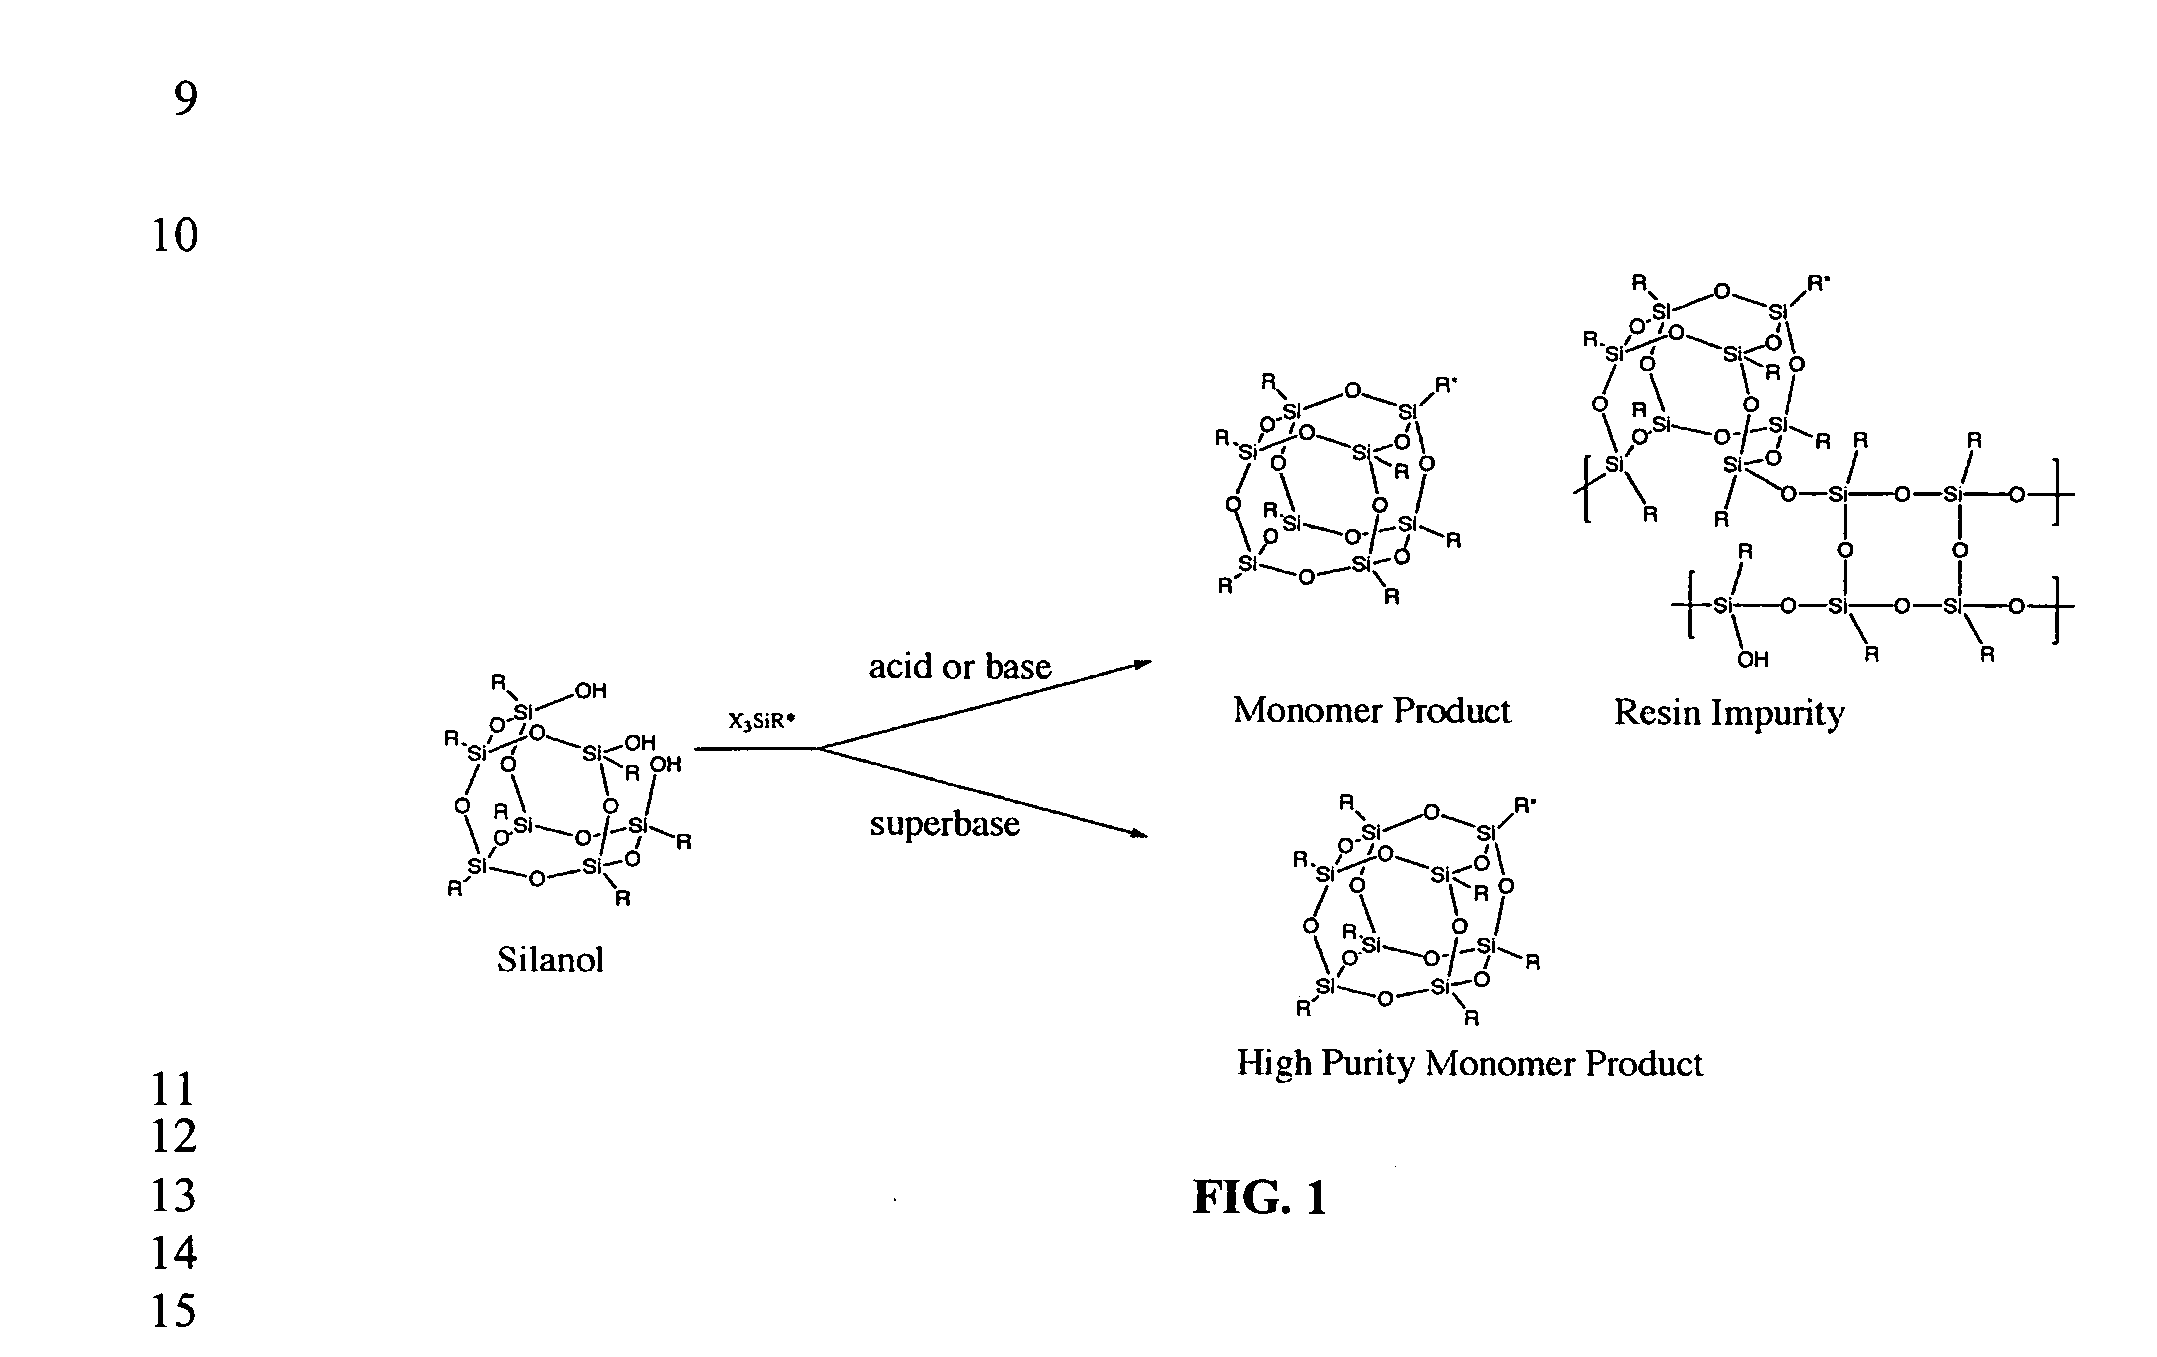 Process for highly purified polyhedral oligomeric silsesquioxane monomers